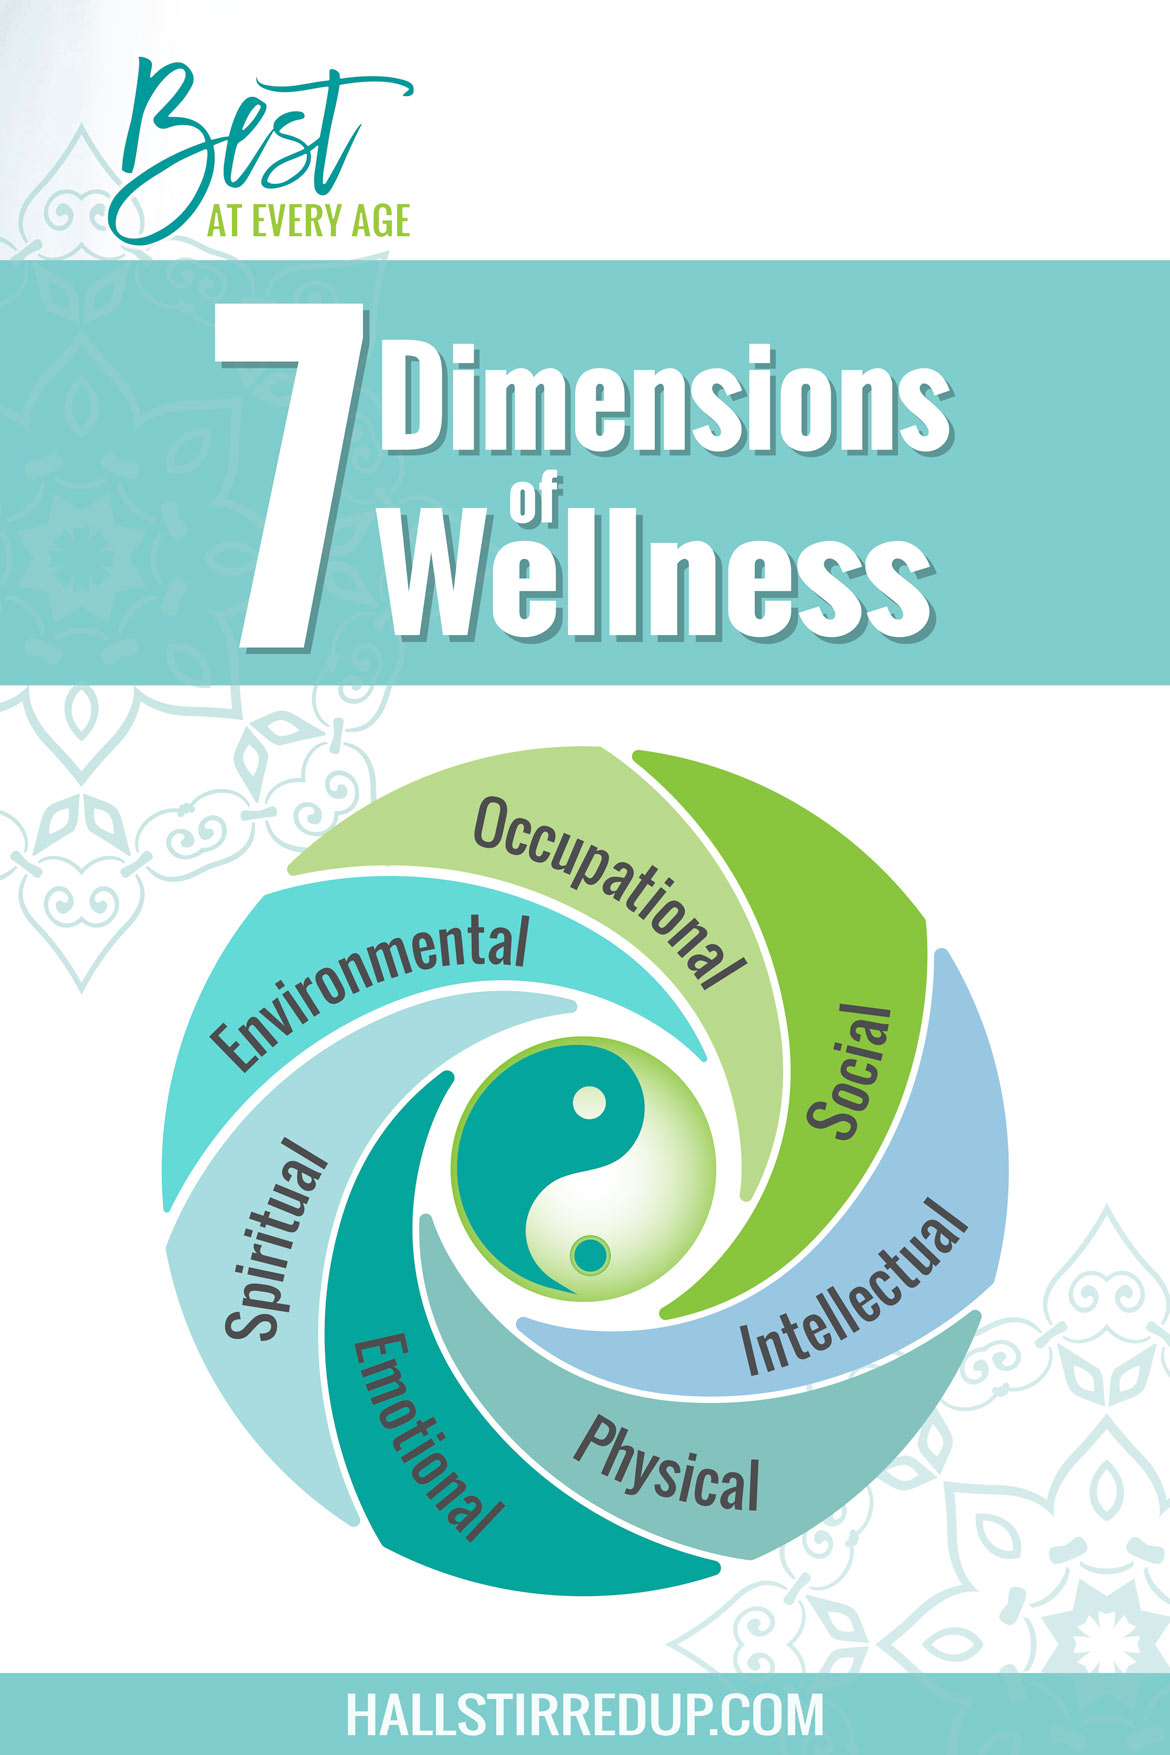 7 dimensions of genuine wellness - best at every age!